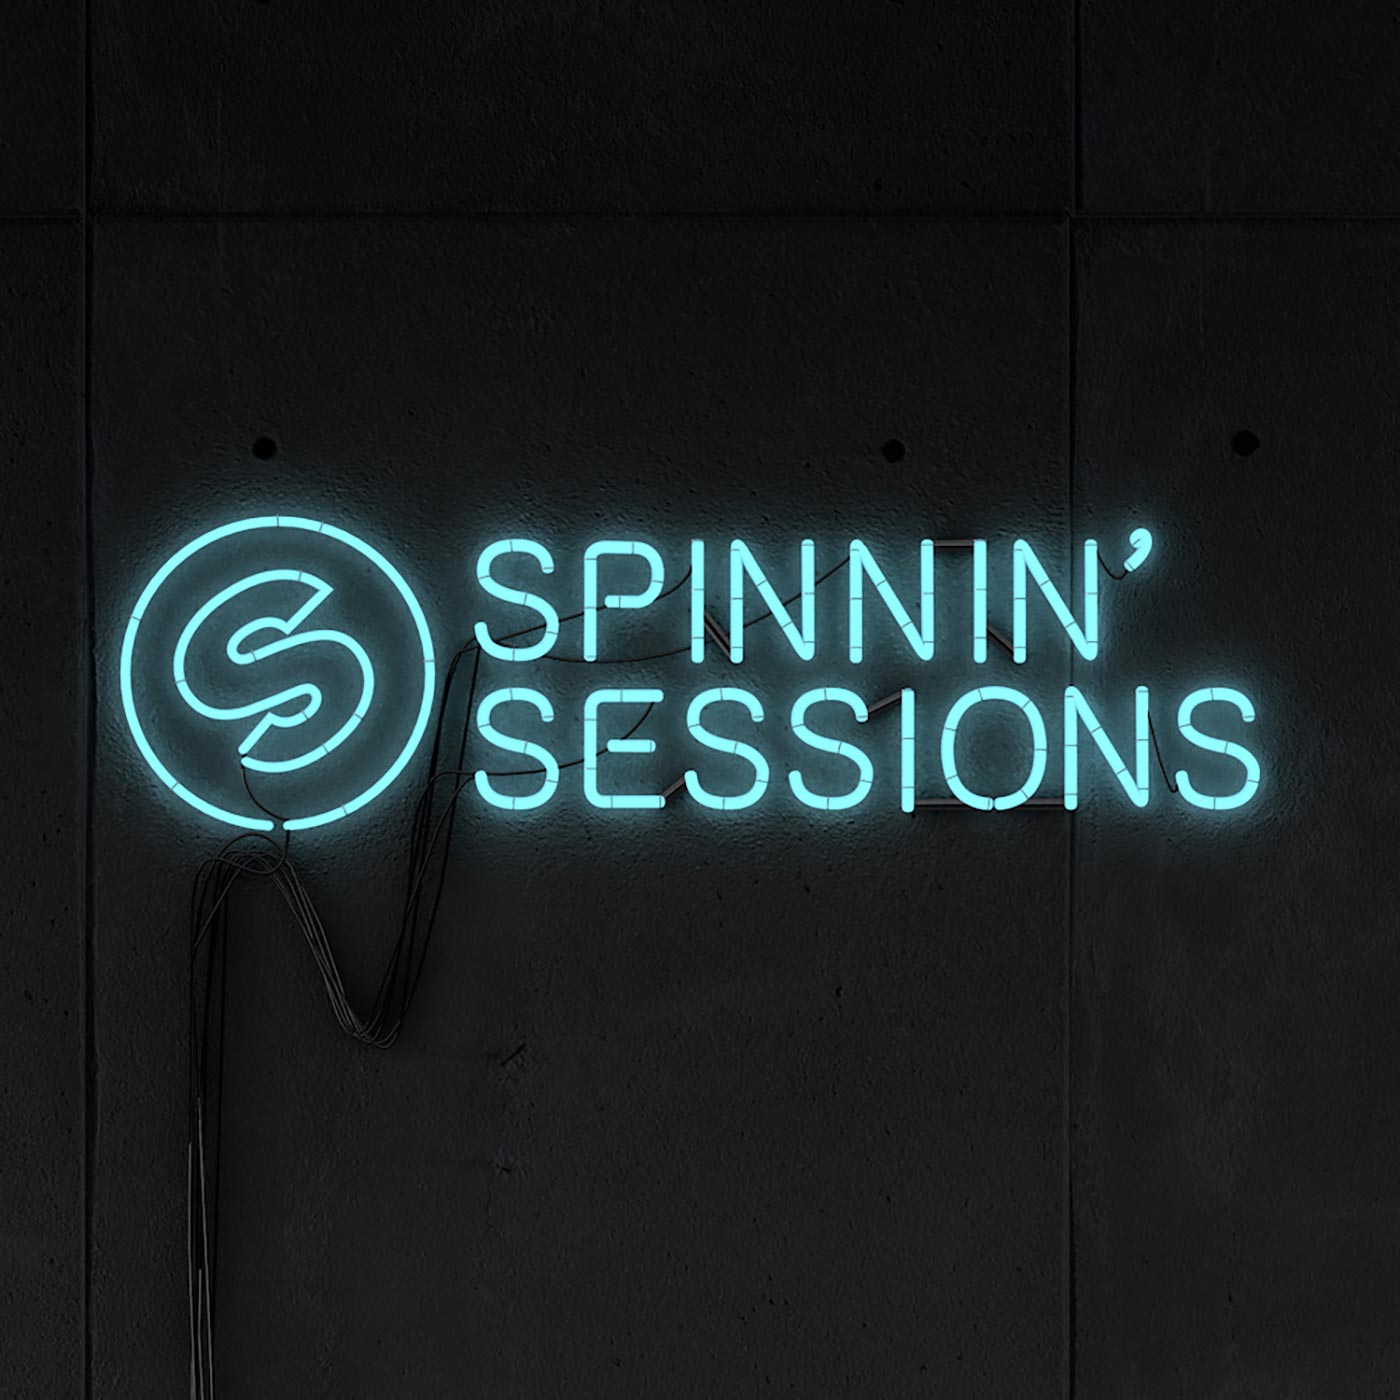 Spinnin' Sessions, EDM Wiki